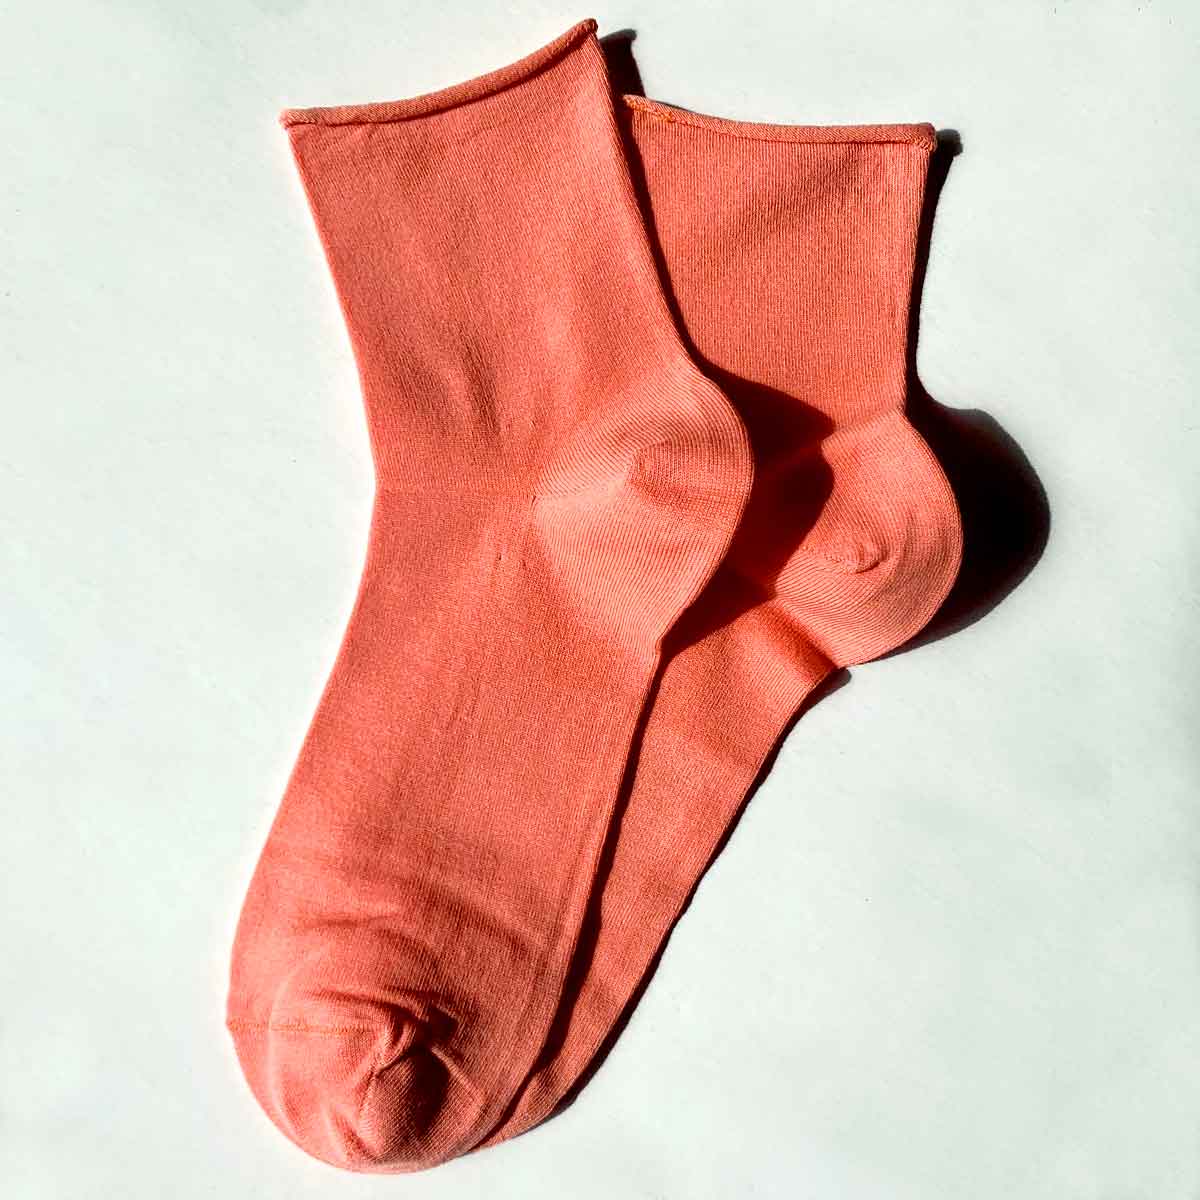 Soft 82% cotton socks with a rolled hem - socks that don't tighten